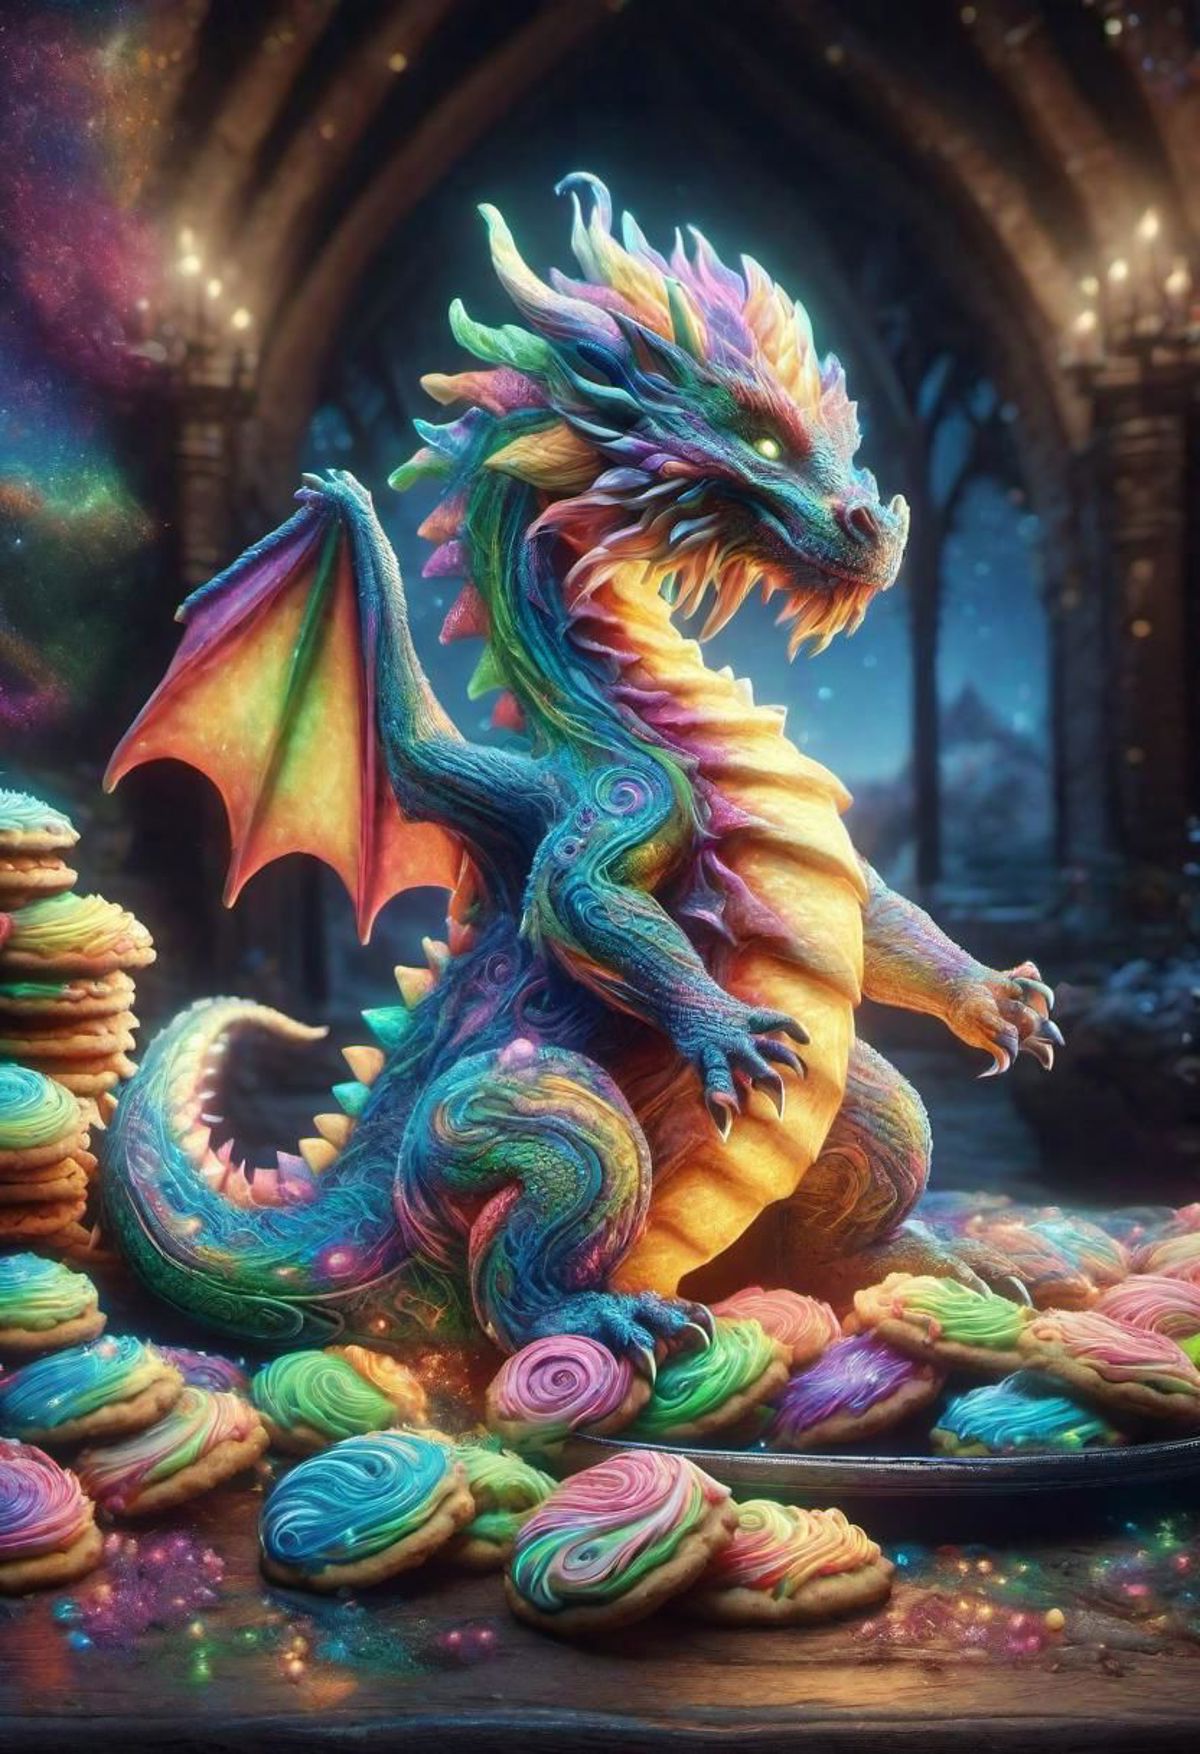 Colorful Dragon Sculpture with Rainbow Wings and Tail, Sitting on a Pile of Cookies and Candy